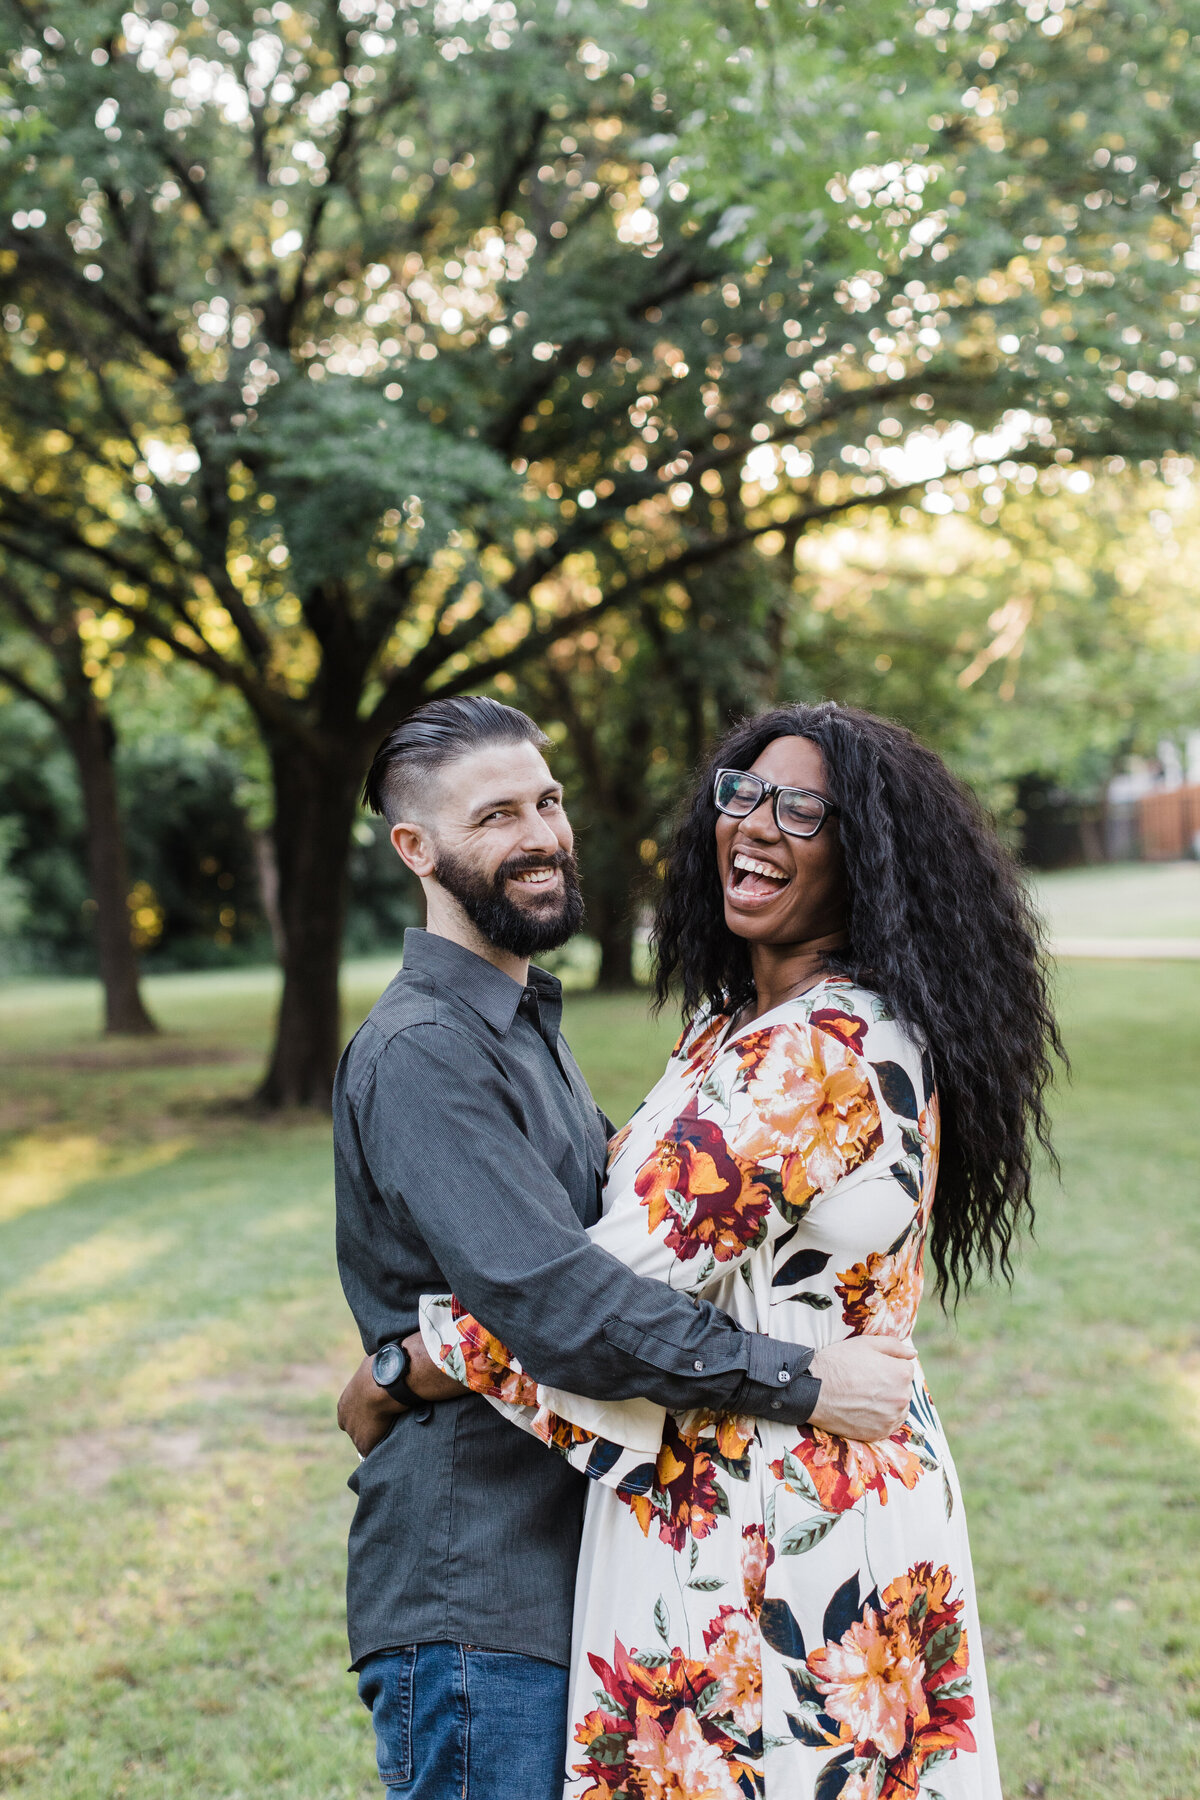 A couple laughing and holding each other close during their outdoor engagement session in Fort Worth, Texas. The woman on the right is wearing a white dress adorned with large, colorful flowers and glasses. The man on the left is wearing a grey dress shirt and jeans.